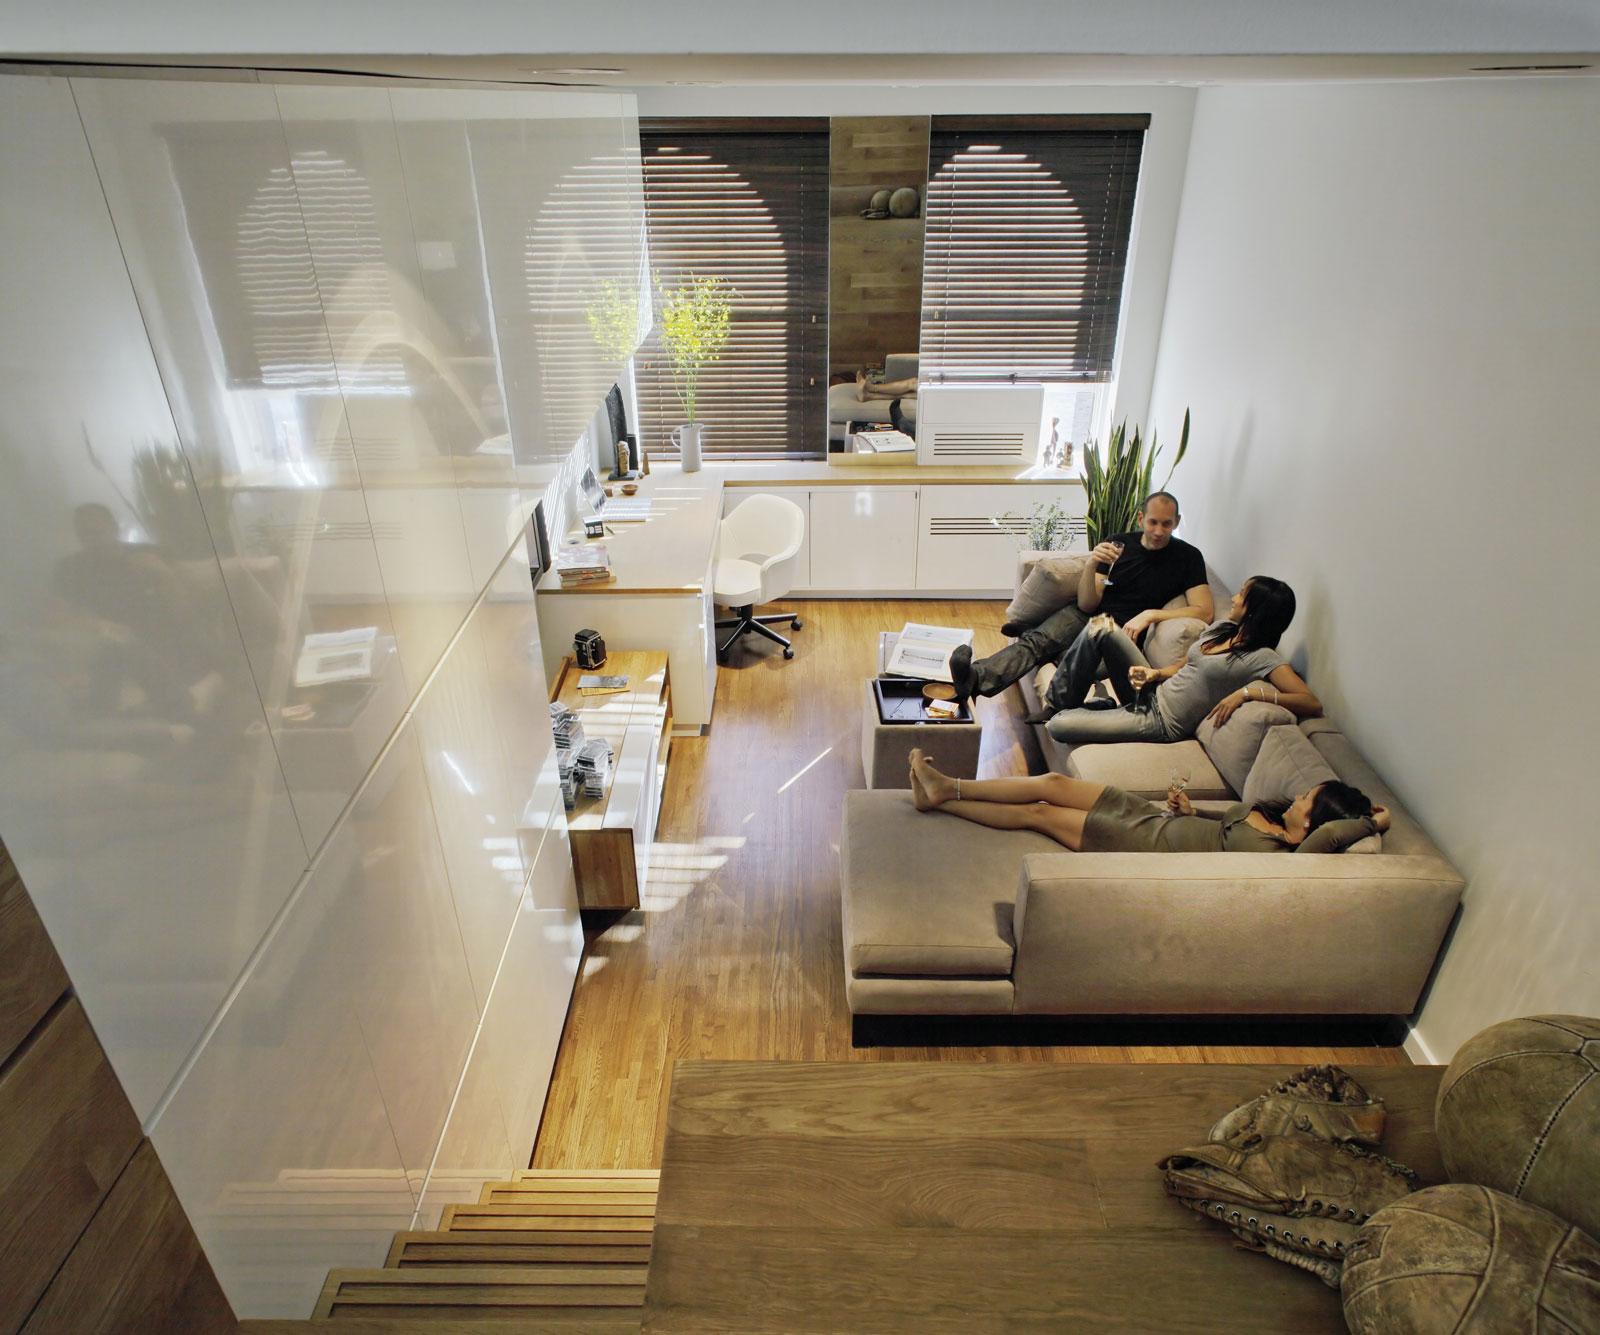 How to Survive In a Big City: The Ultimate Design for a Tiny Apartment